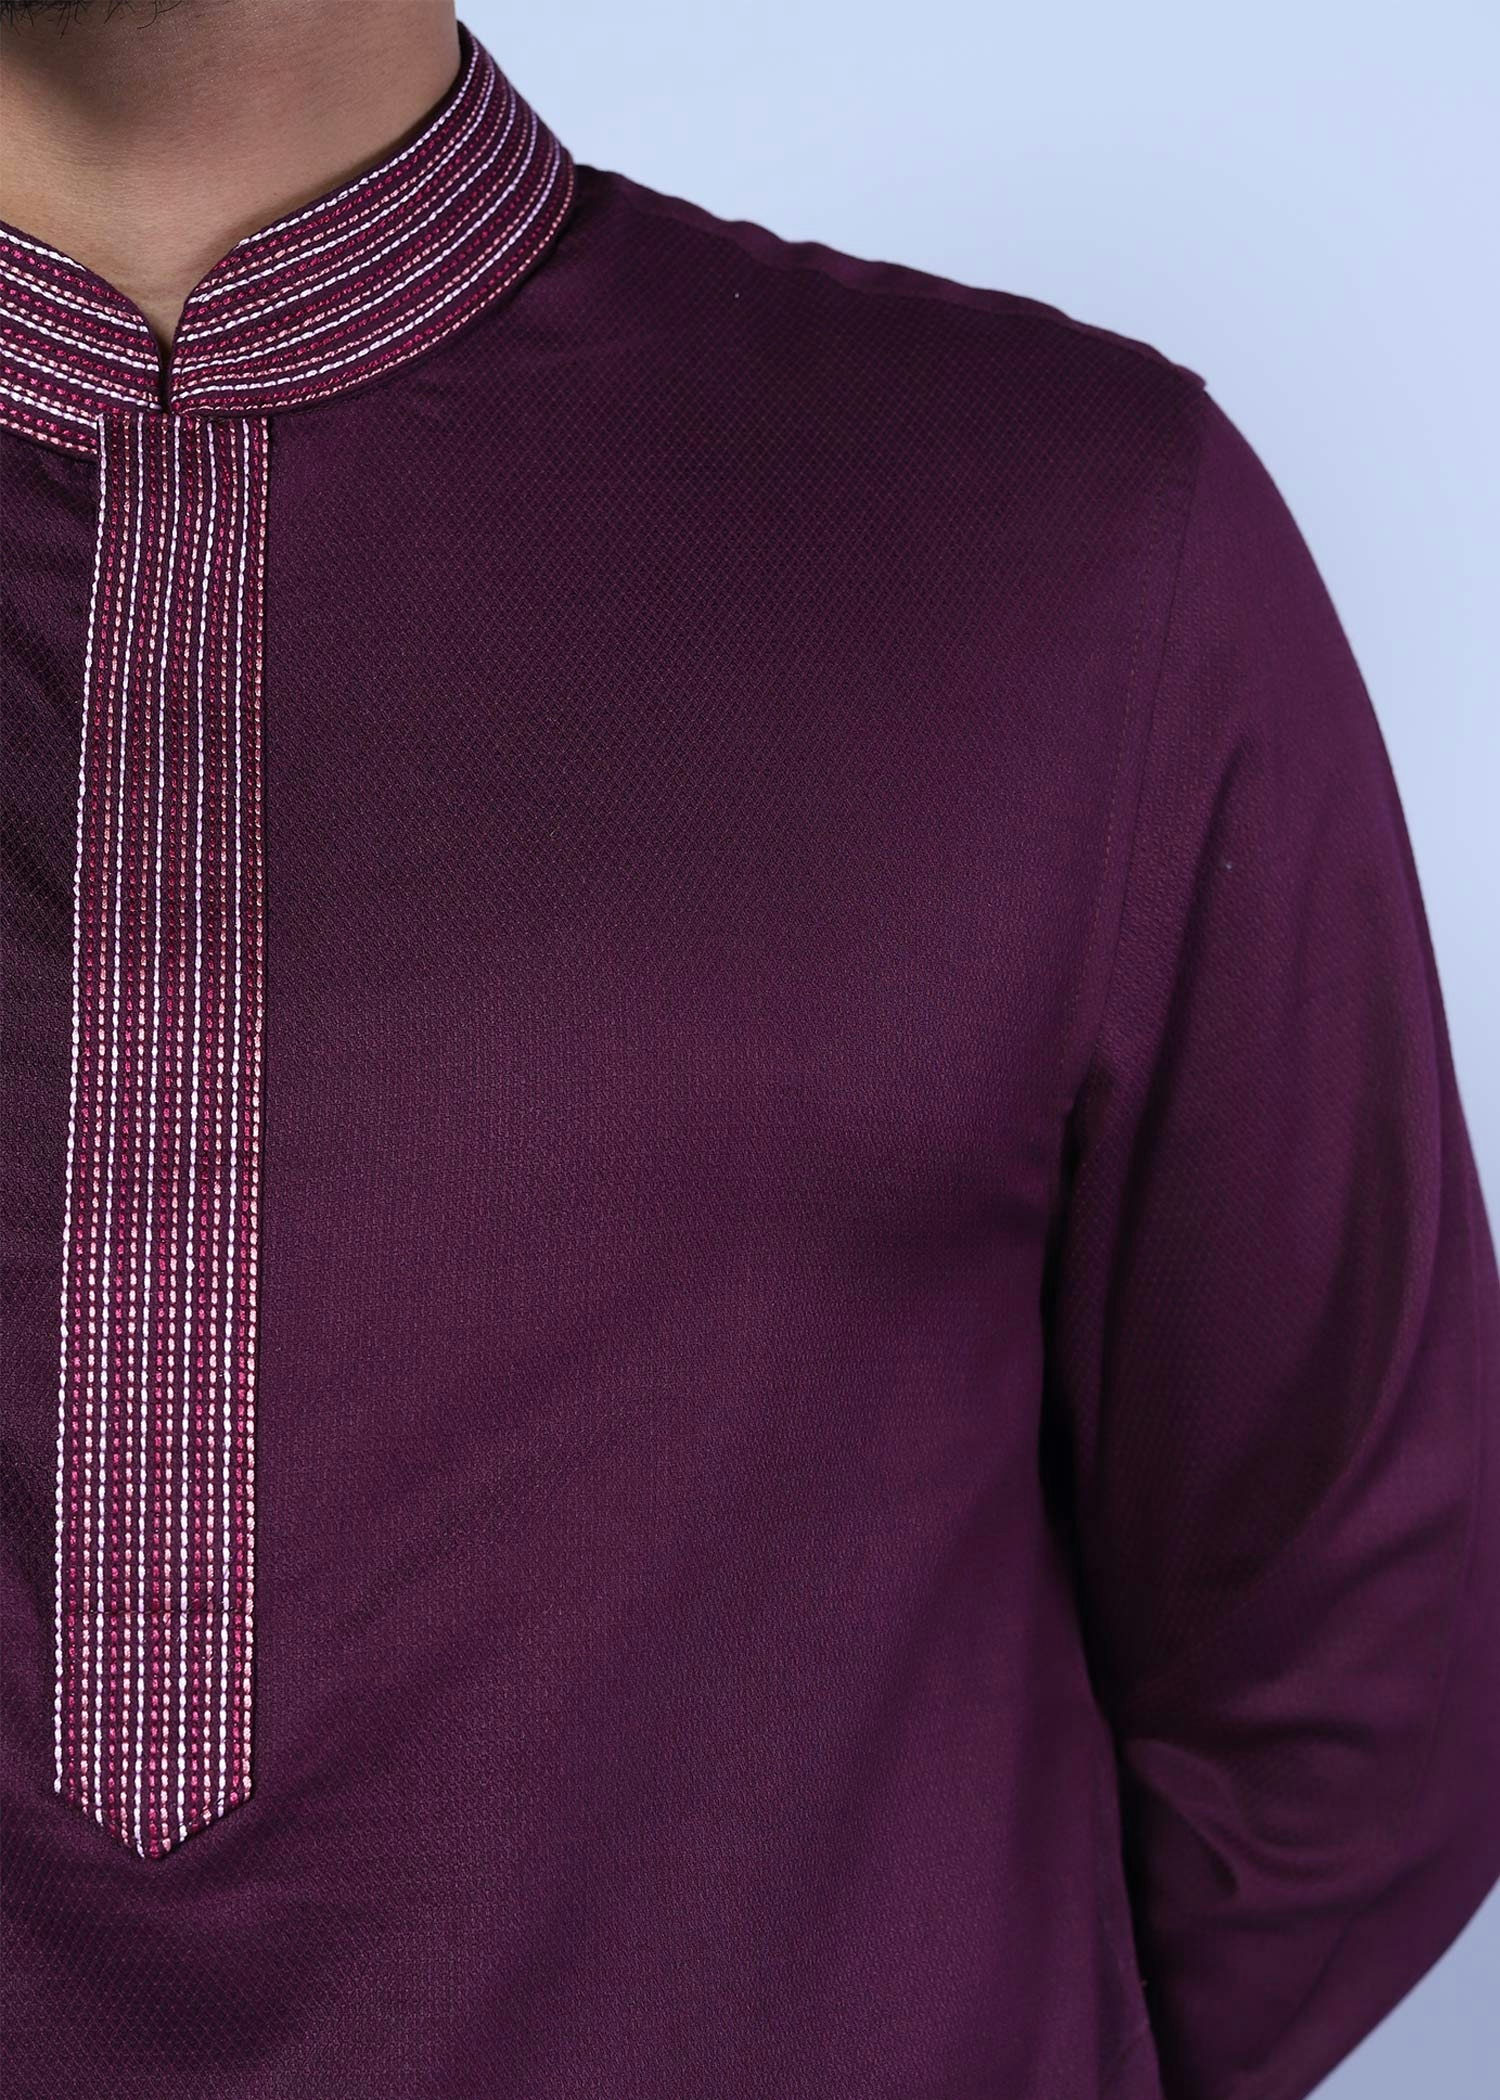 cairo xiv maroon color close front view